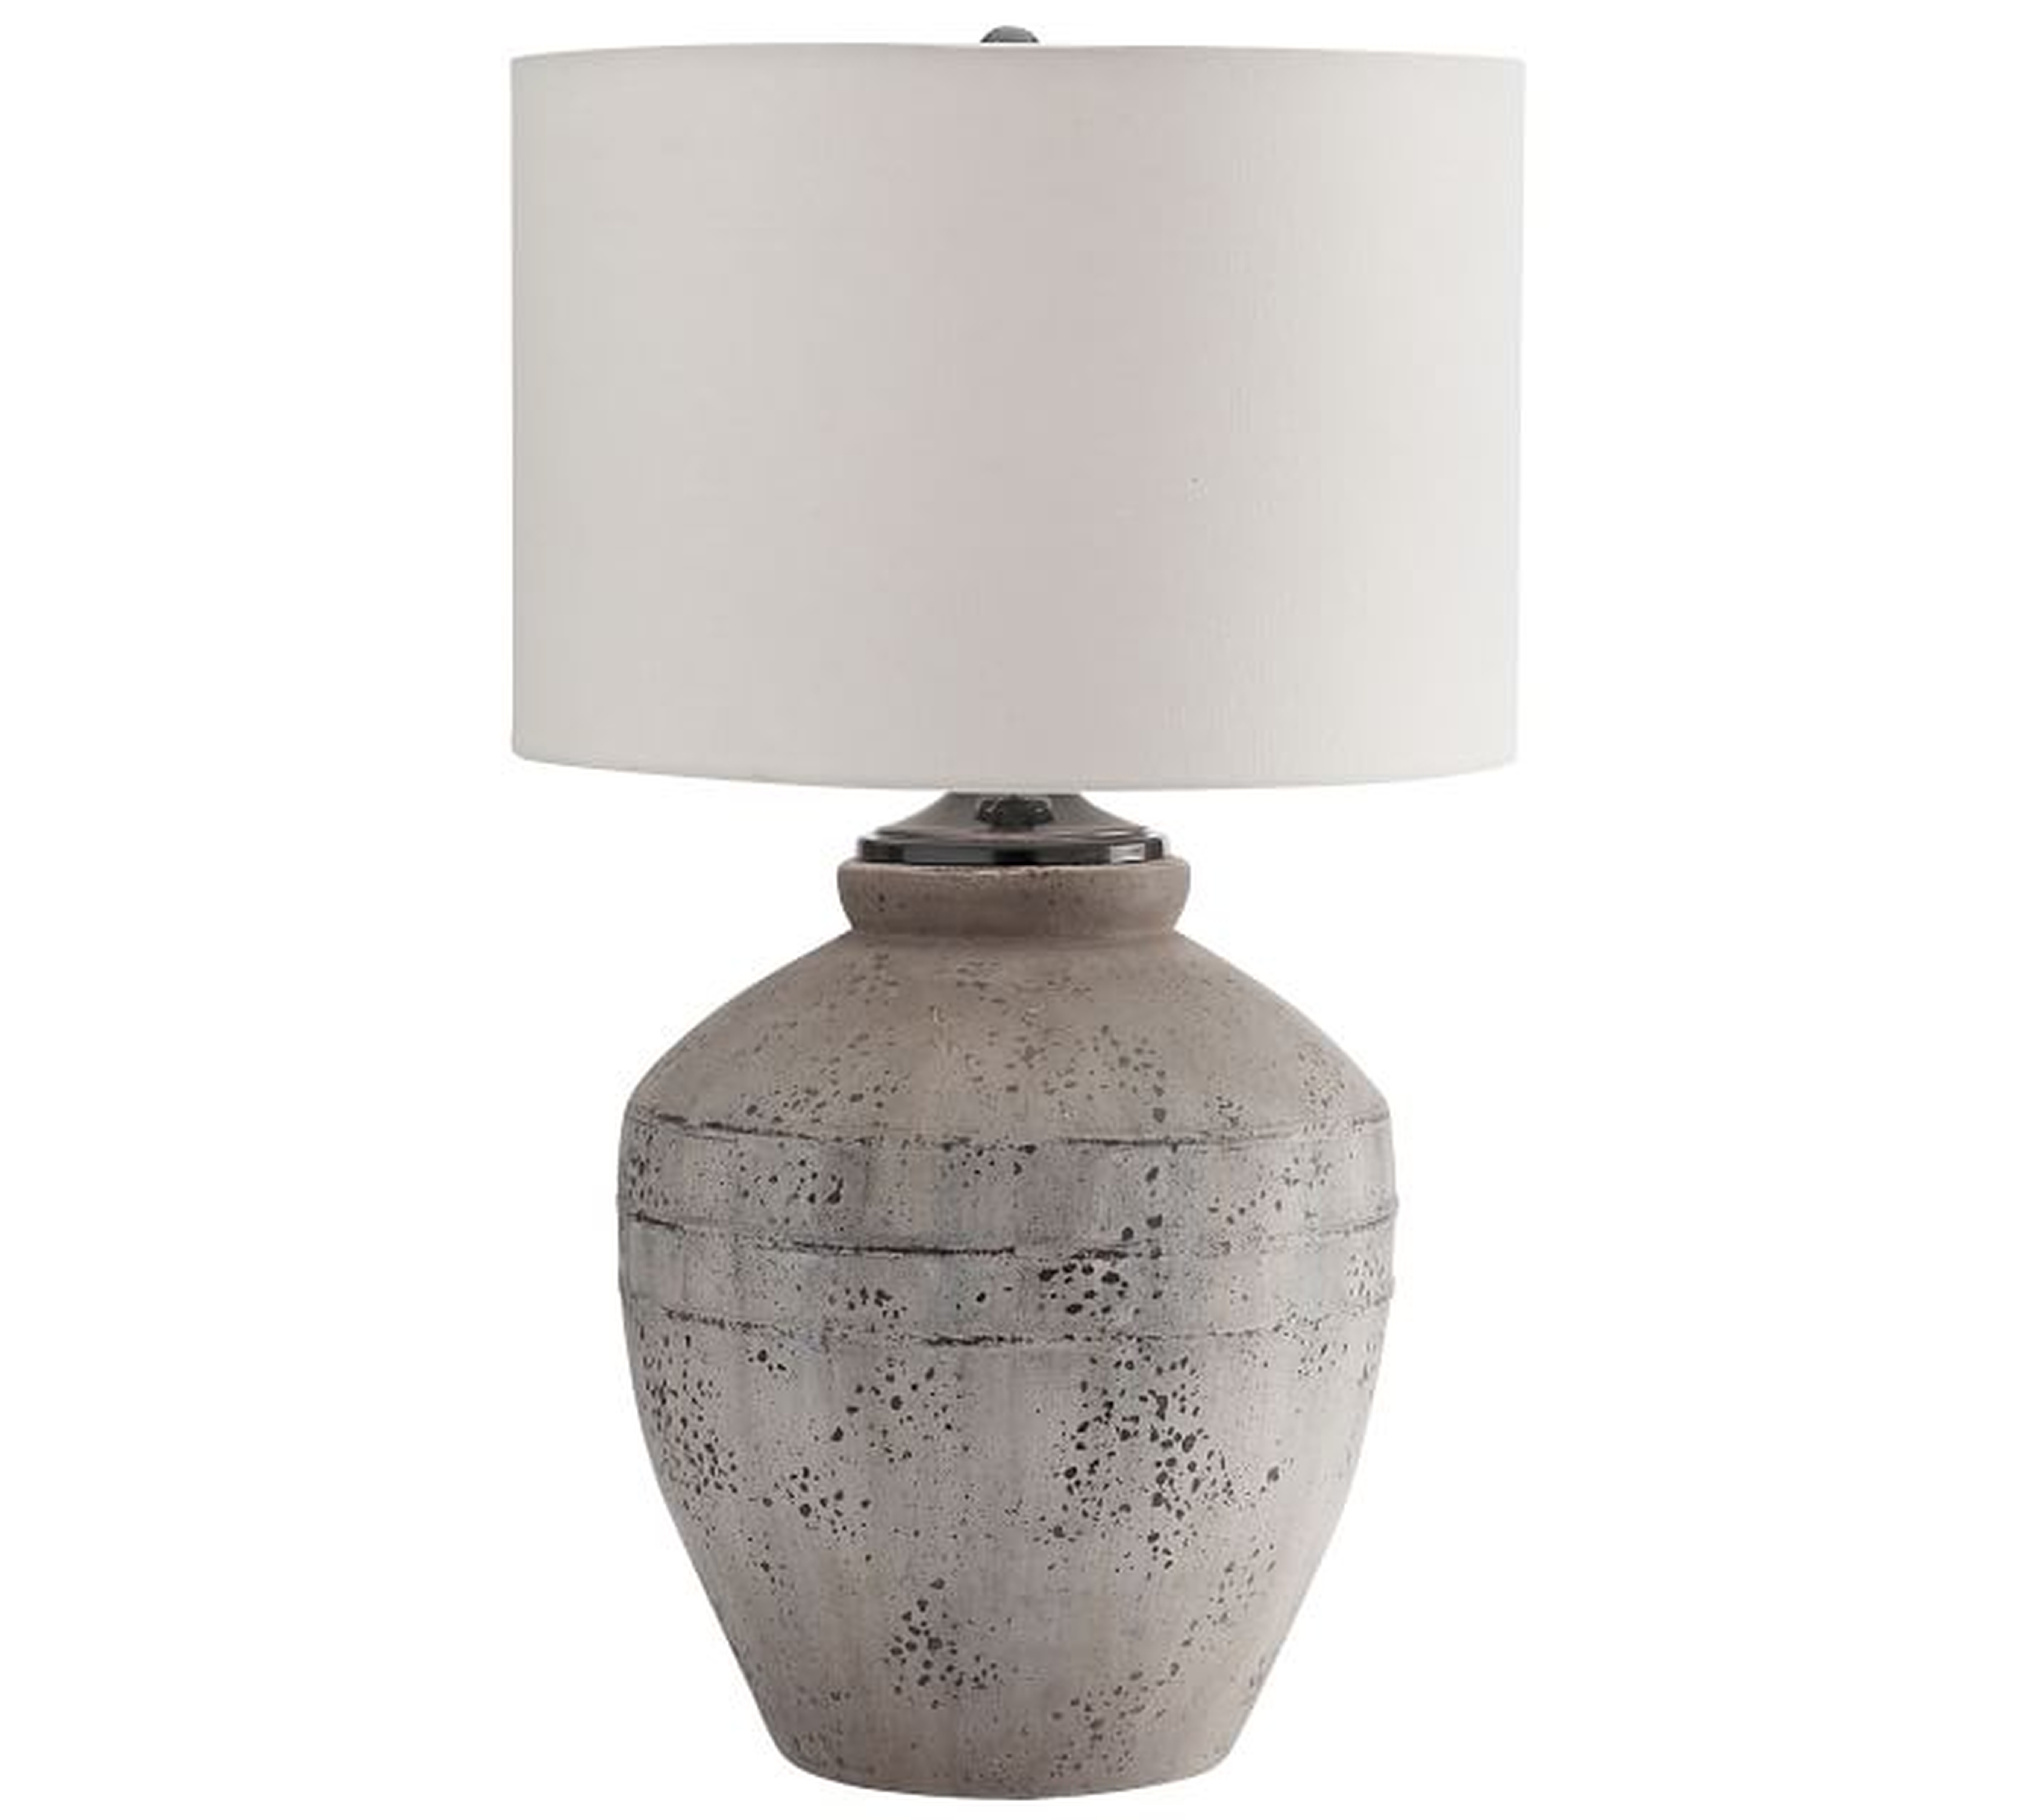 Maddox Terra Cotta 23.5" Table Lamp, Rustic Gray Base With Medium Drum Shade, White - Pottery Barn